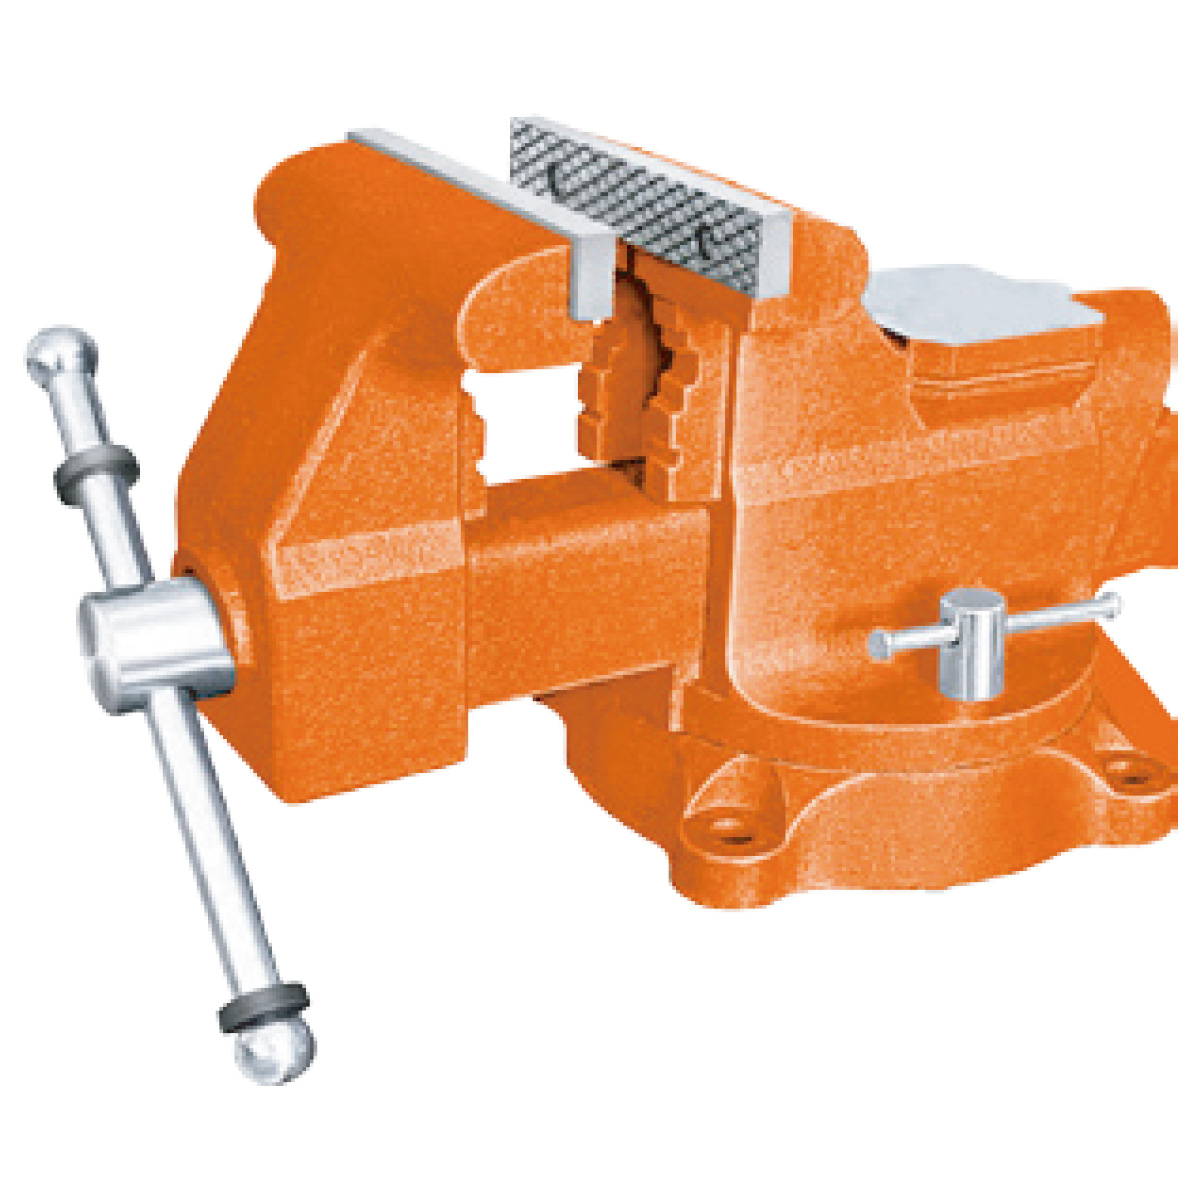 AMERICAN PROFESSIONAL HEAVY DUTY BENCH VISE